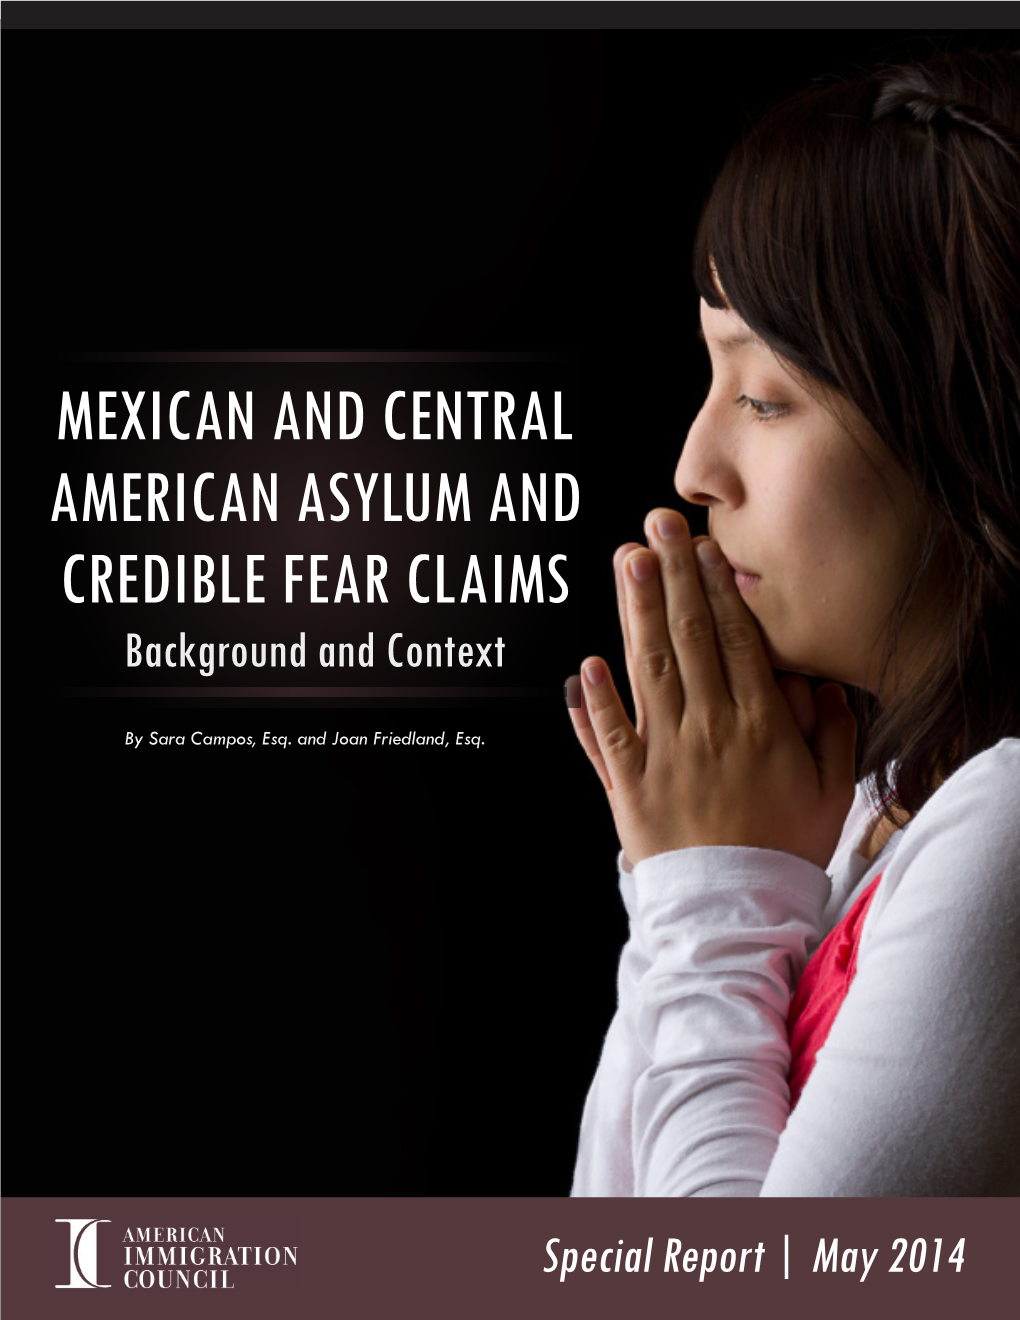 Mexican and Central American Asylum and Credible Fear Claims Background and Context